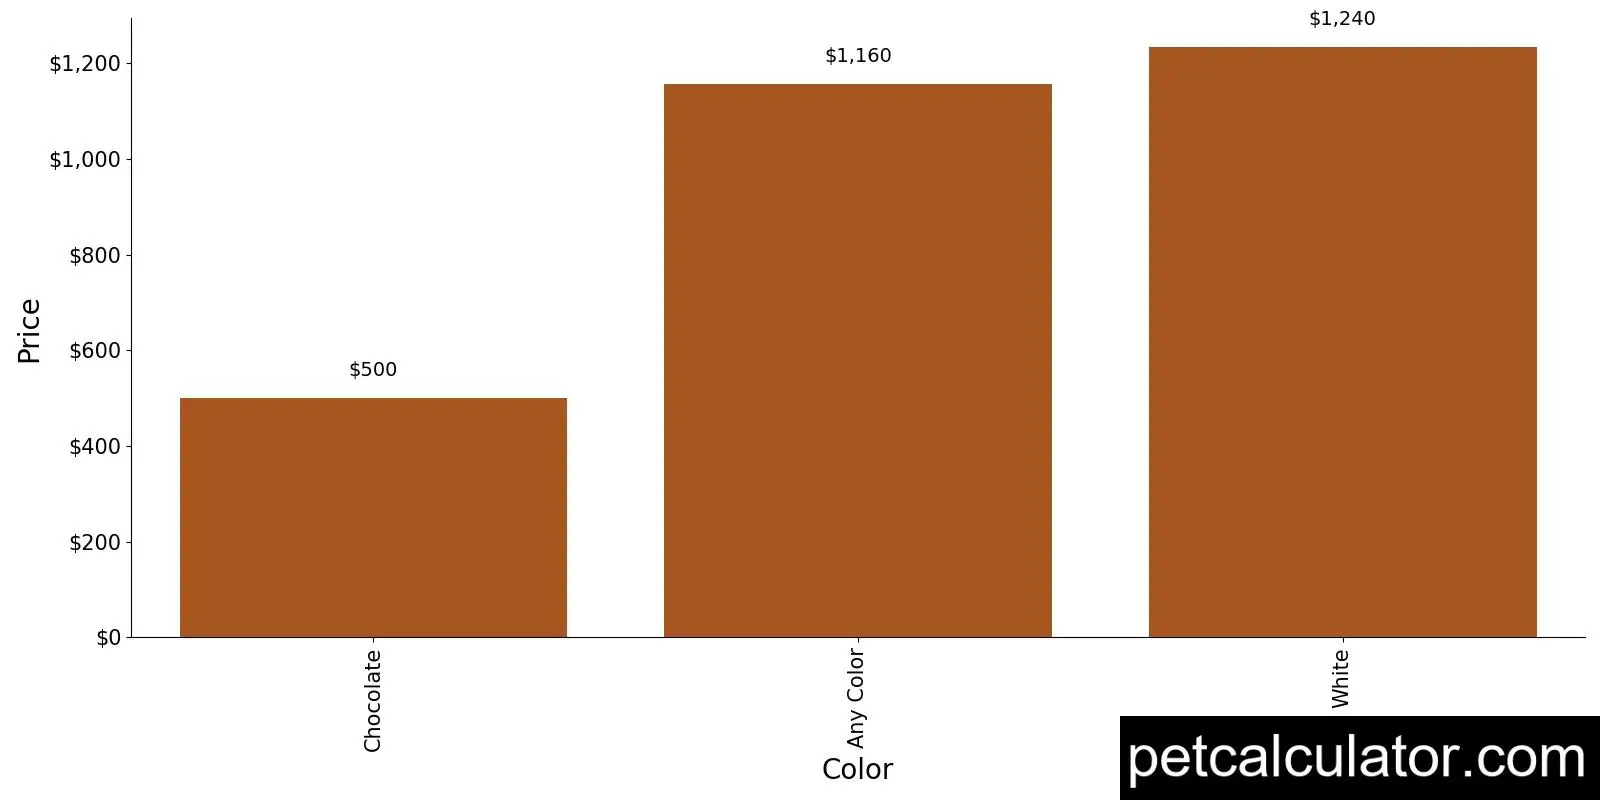 Price of Boykin Spaniel by Color 